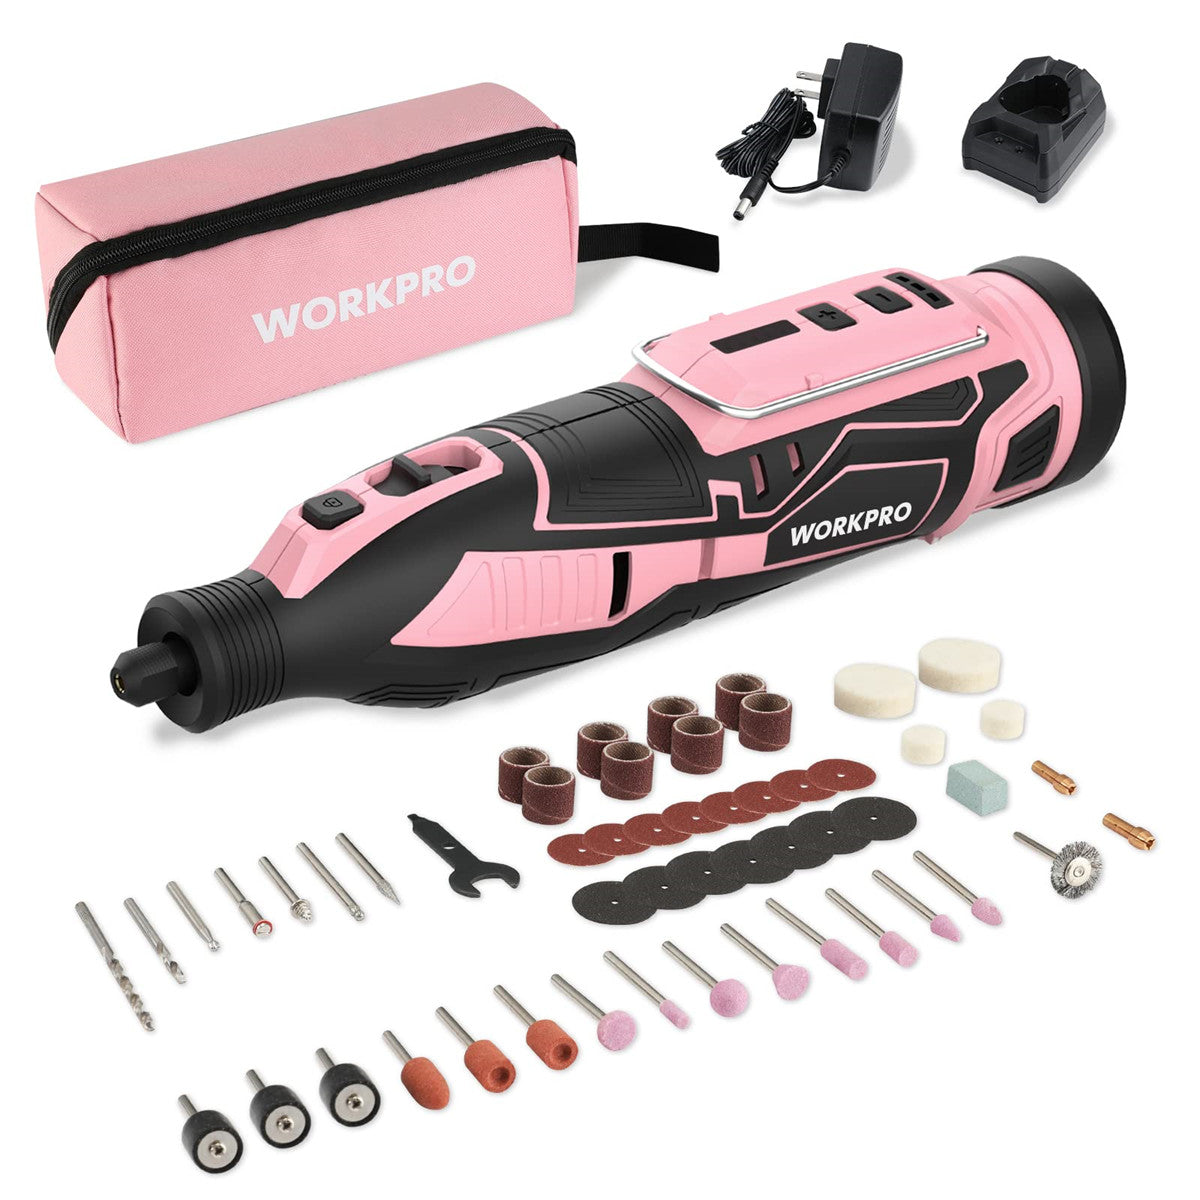 WORKPRO Pink 12V Cordless Rotary Tool Kit, 5 Variable Speeds